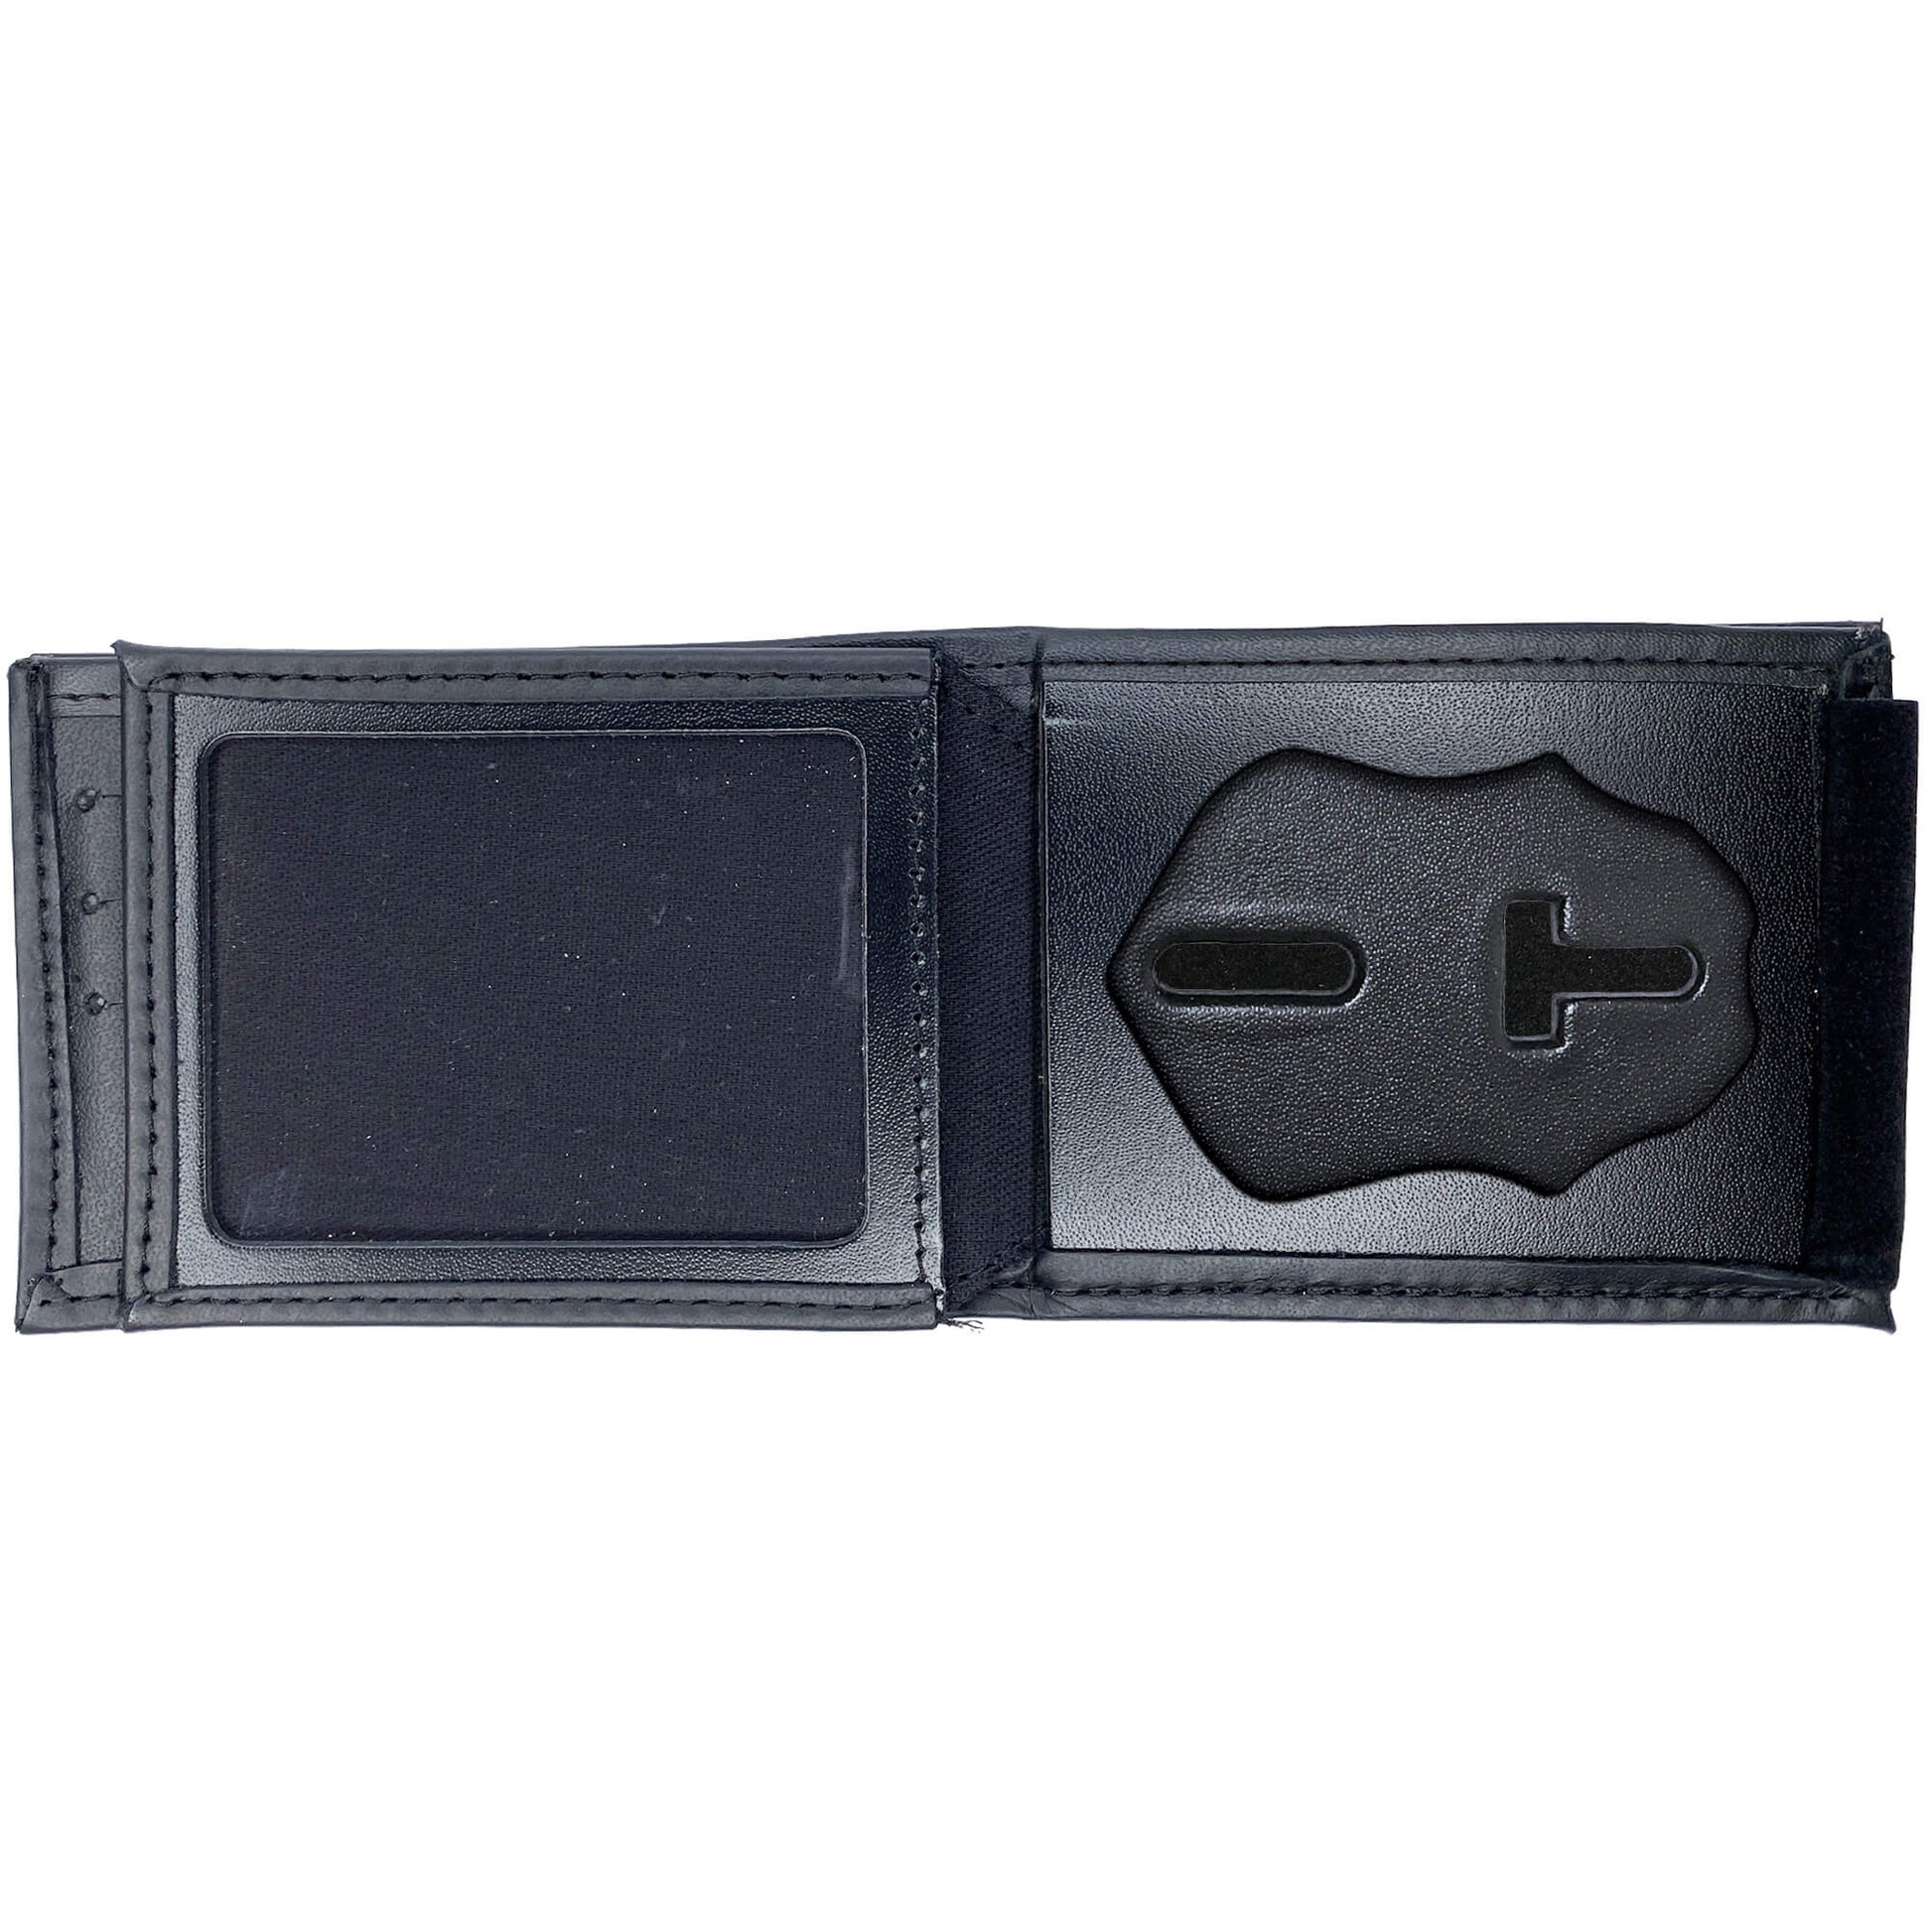 New Jersey Department of Corrections (DOC) Sergeant & Up Horizontal Bifold Hidden Badge Wallet-Perfect Fit-911 Duty Gear USA